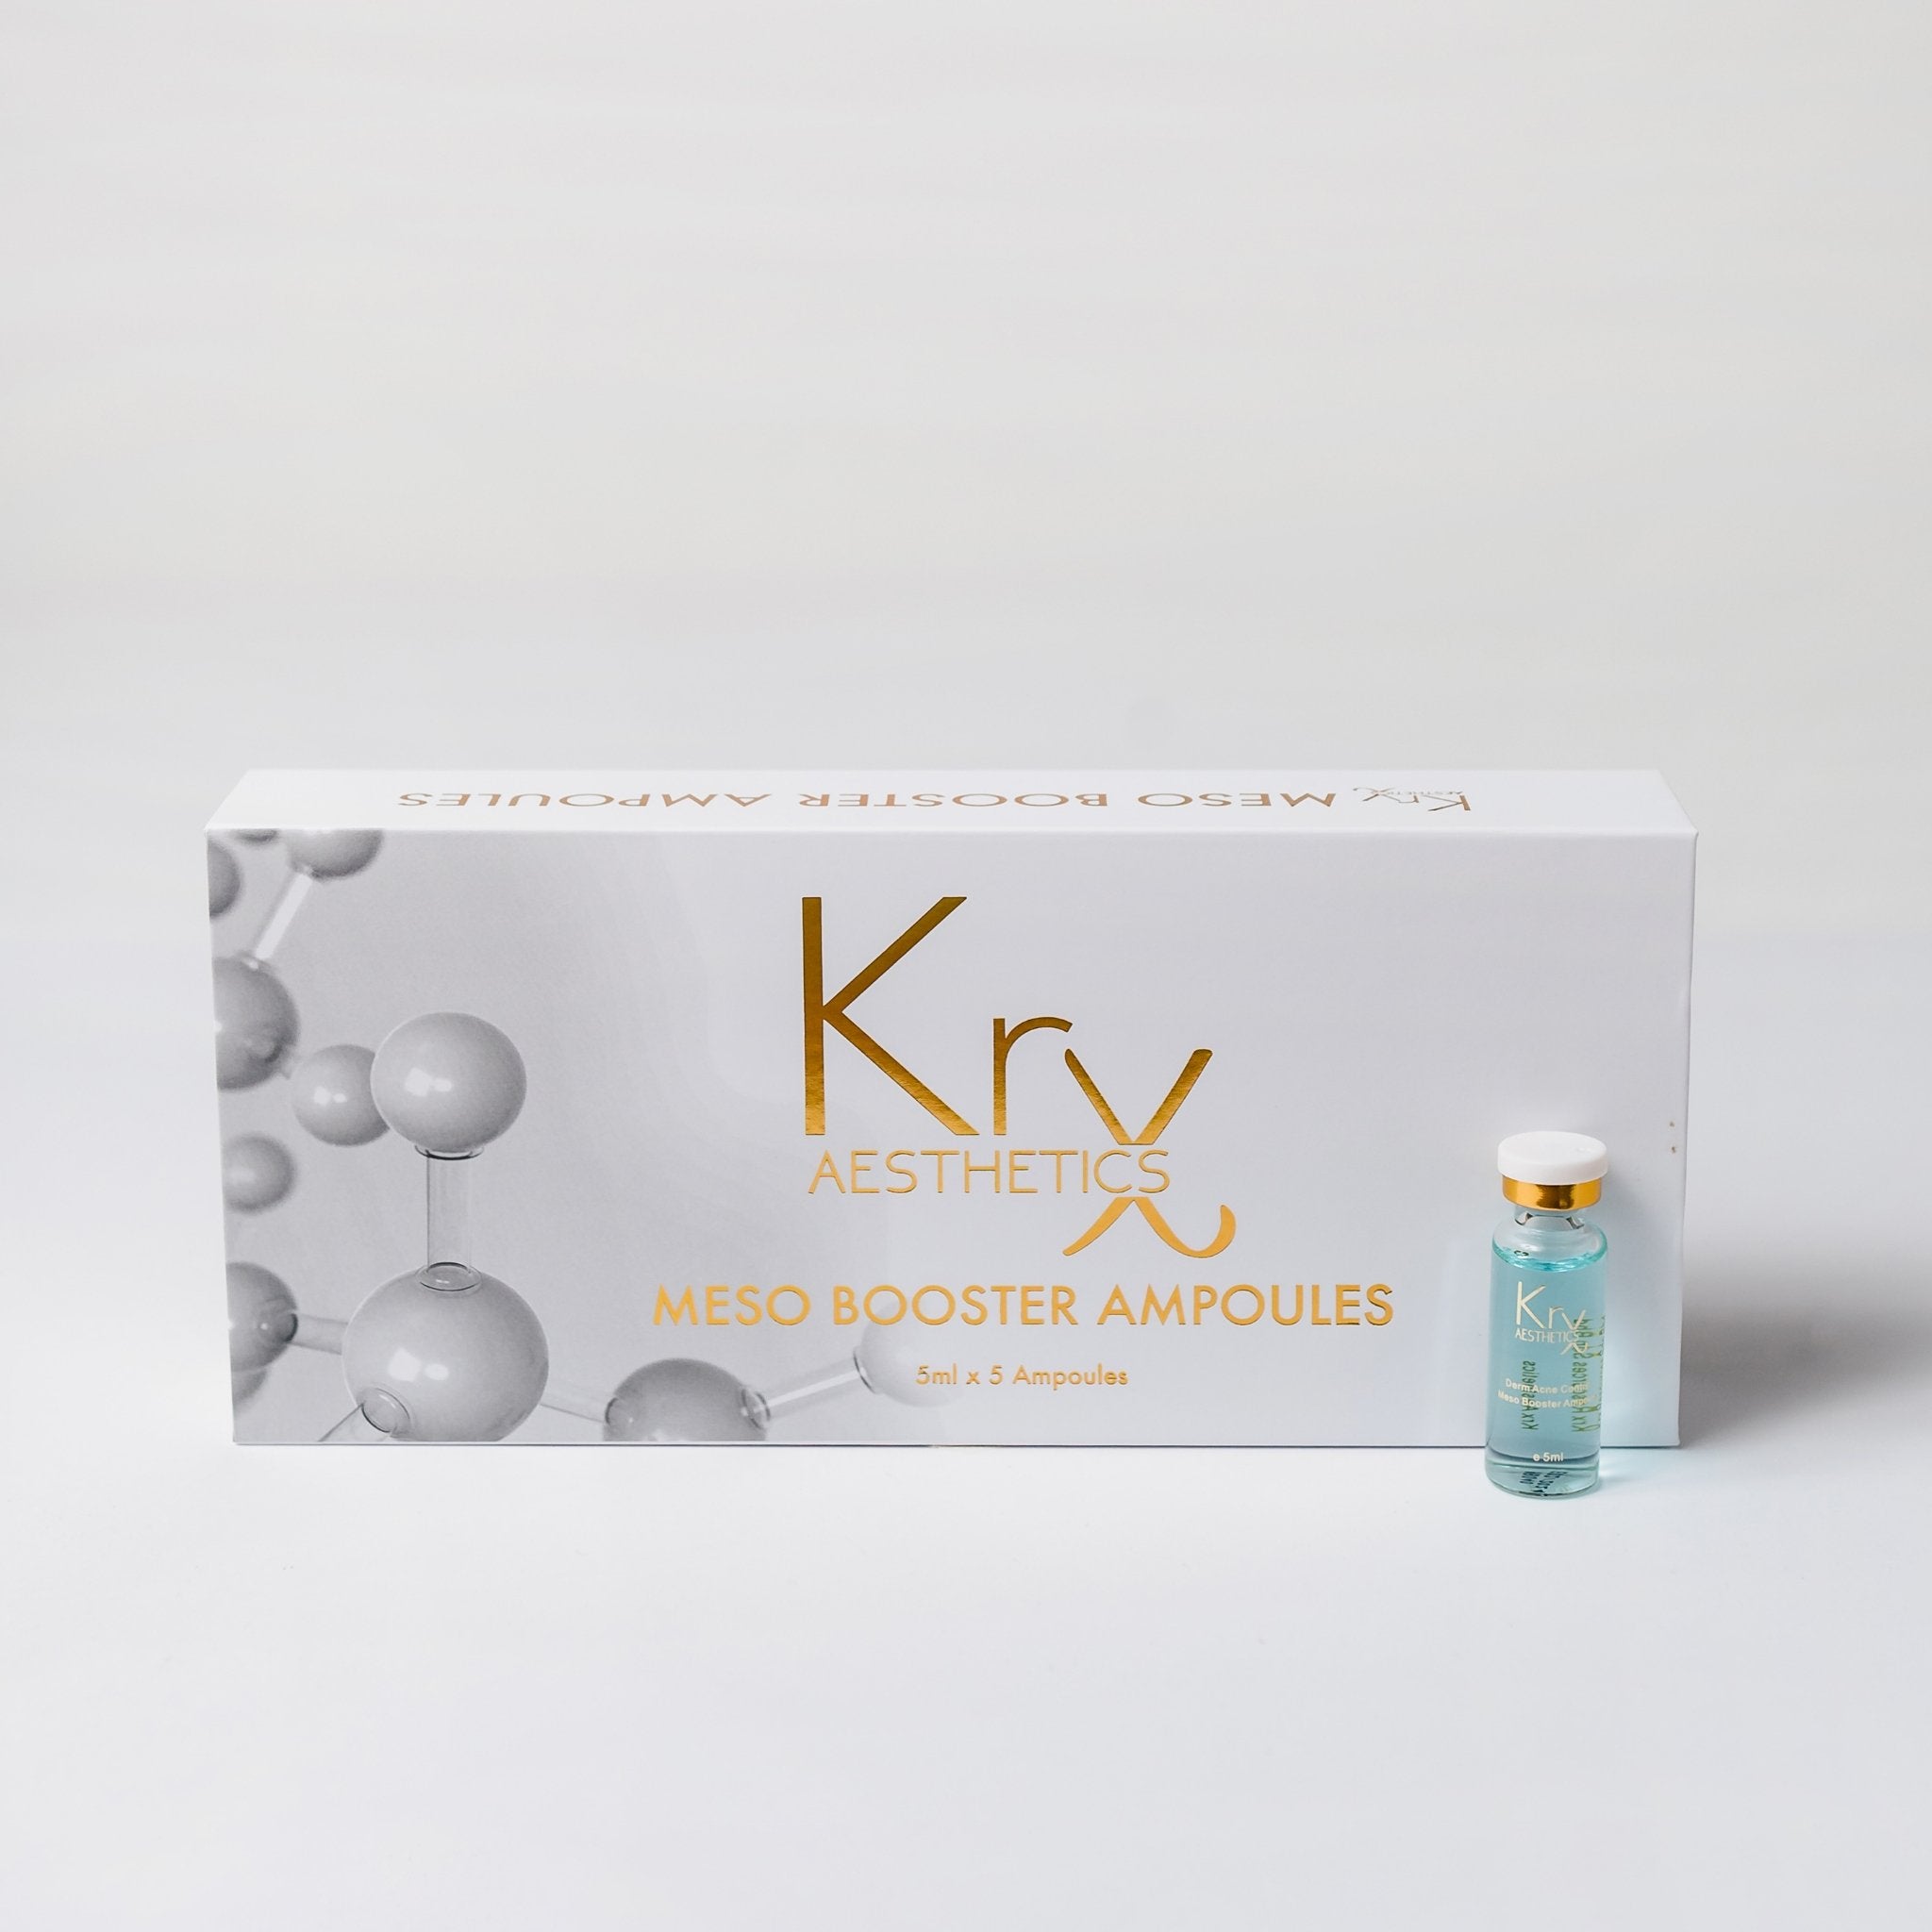 KrX Meso Booster Ampoule Derm Acne Control - by Kin Aesthetics 